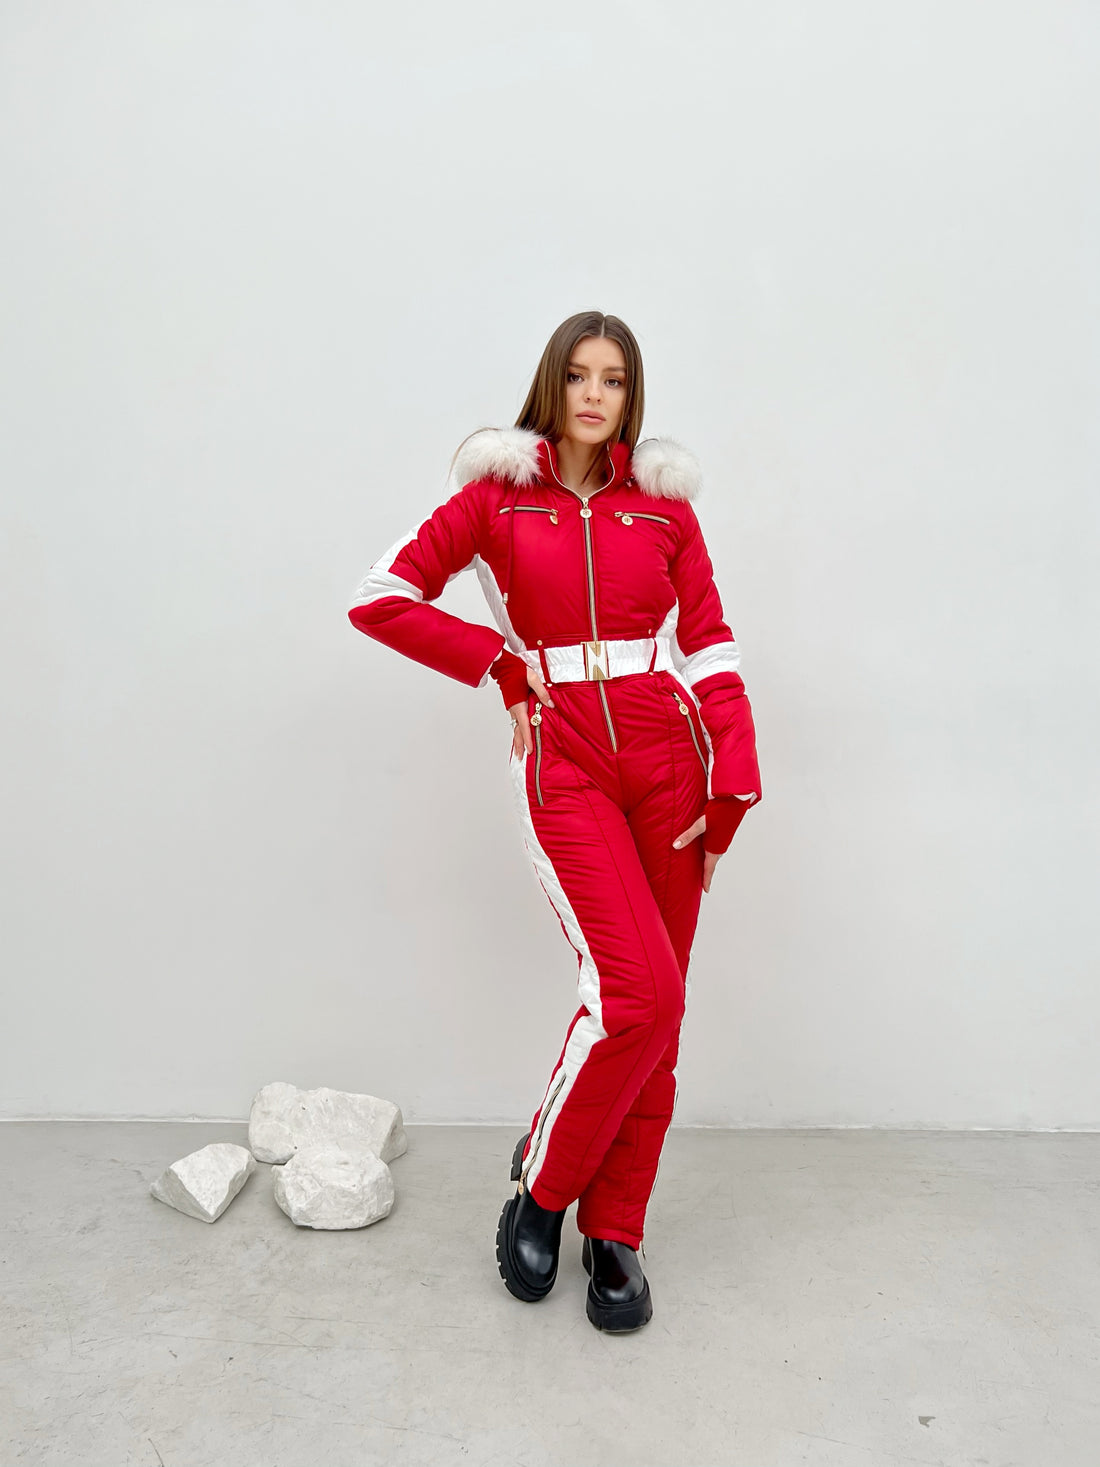 Bright ski one piece DENALI - RED-WHITE inserts on side jumpsuit